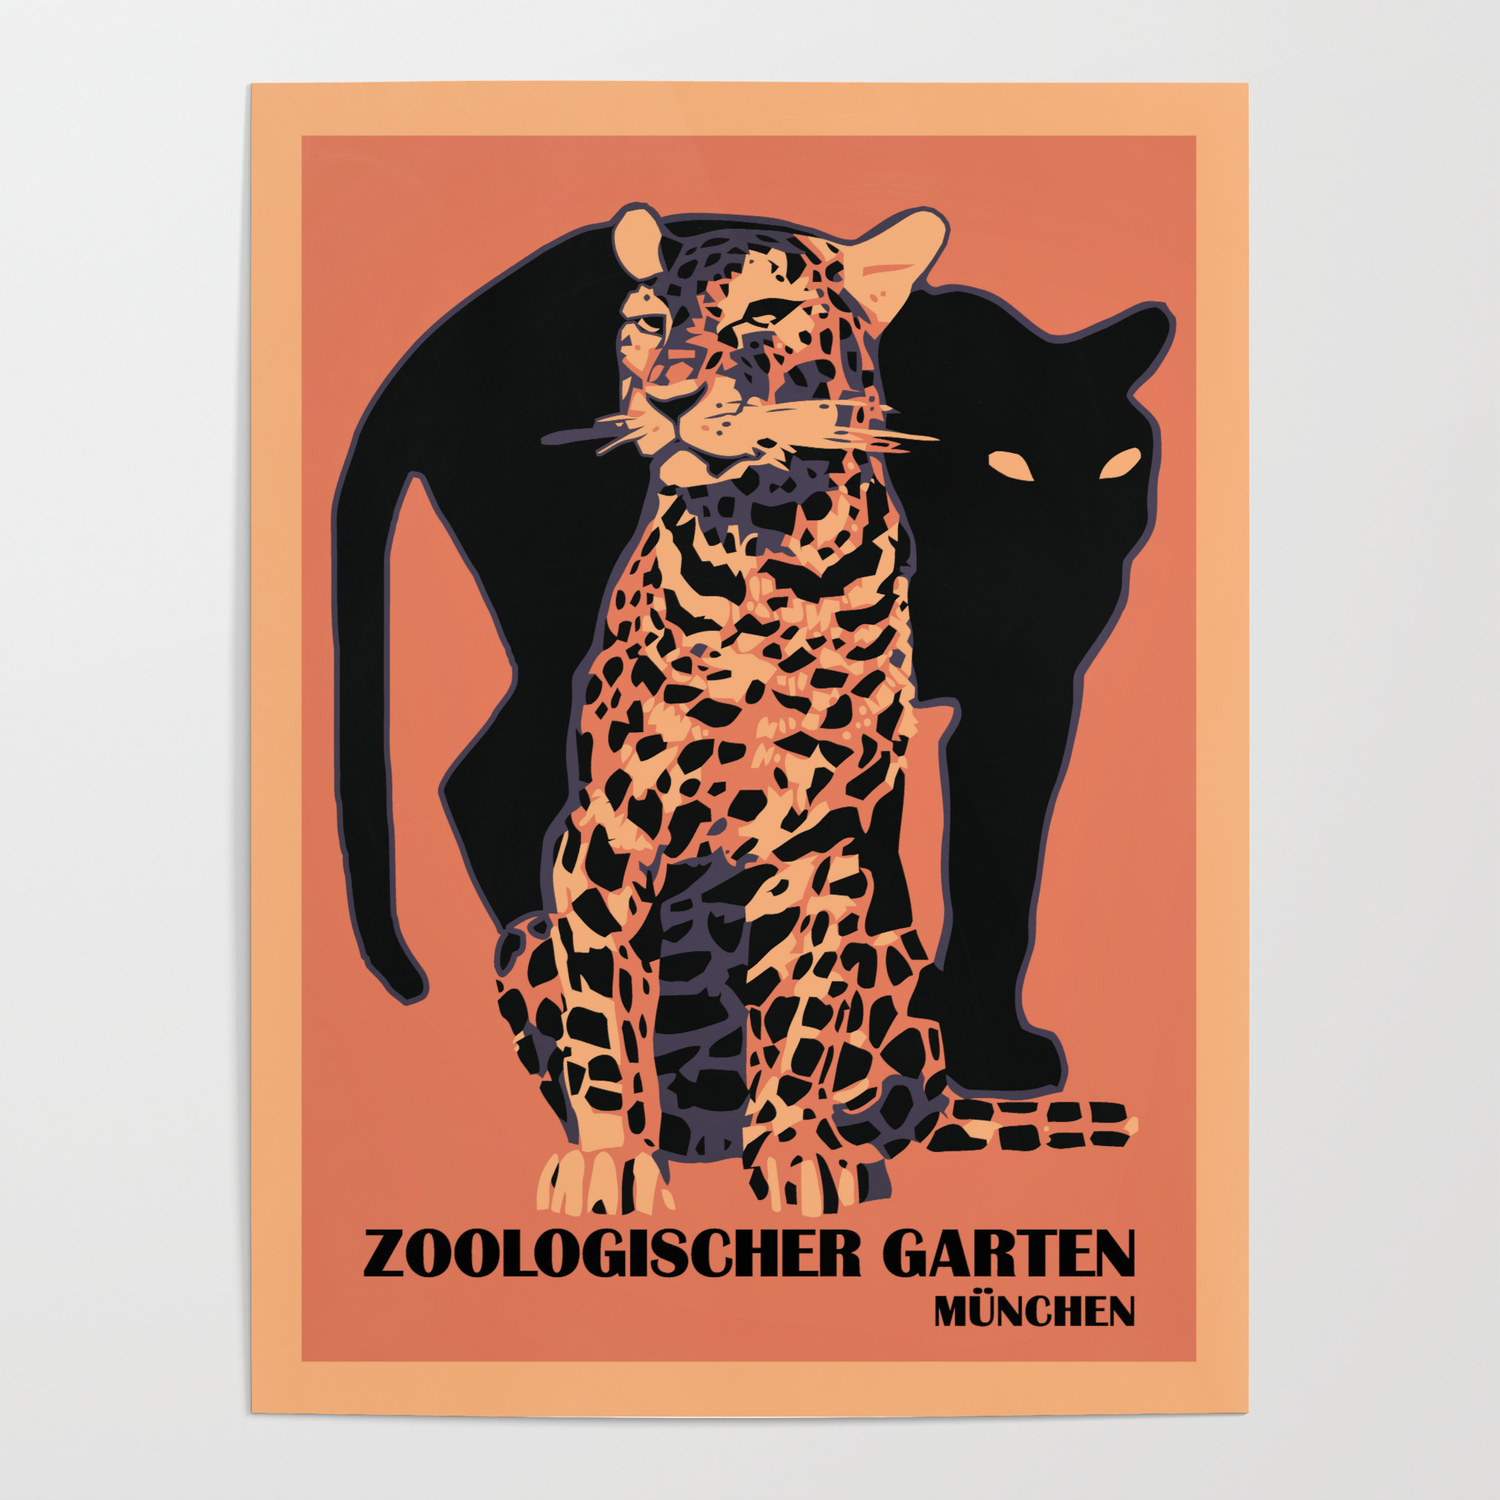 Muchen vintage zoo big cats travel poster repro 24x36 